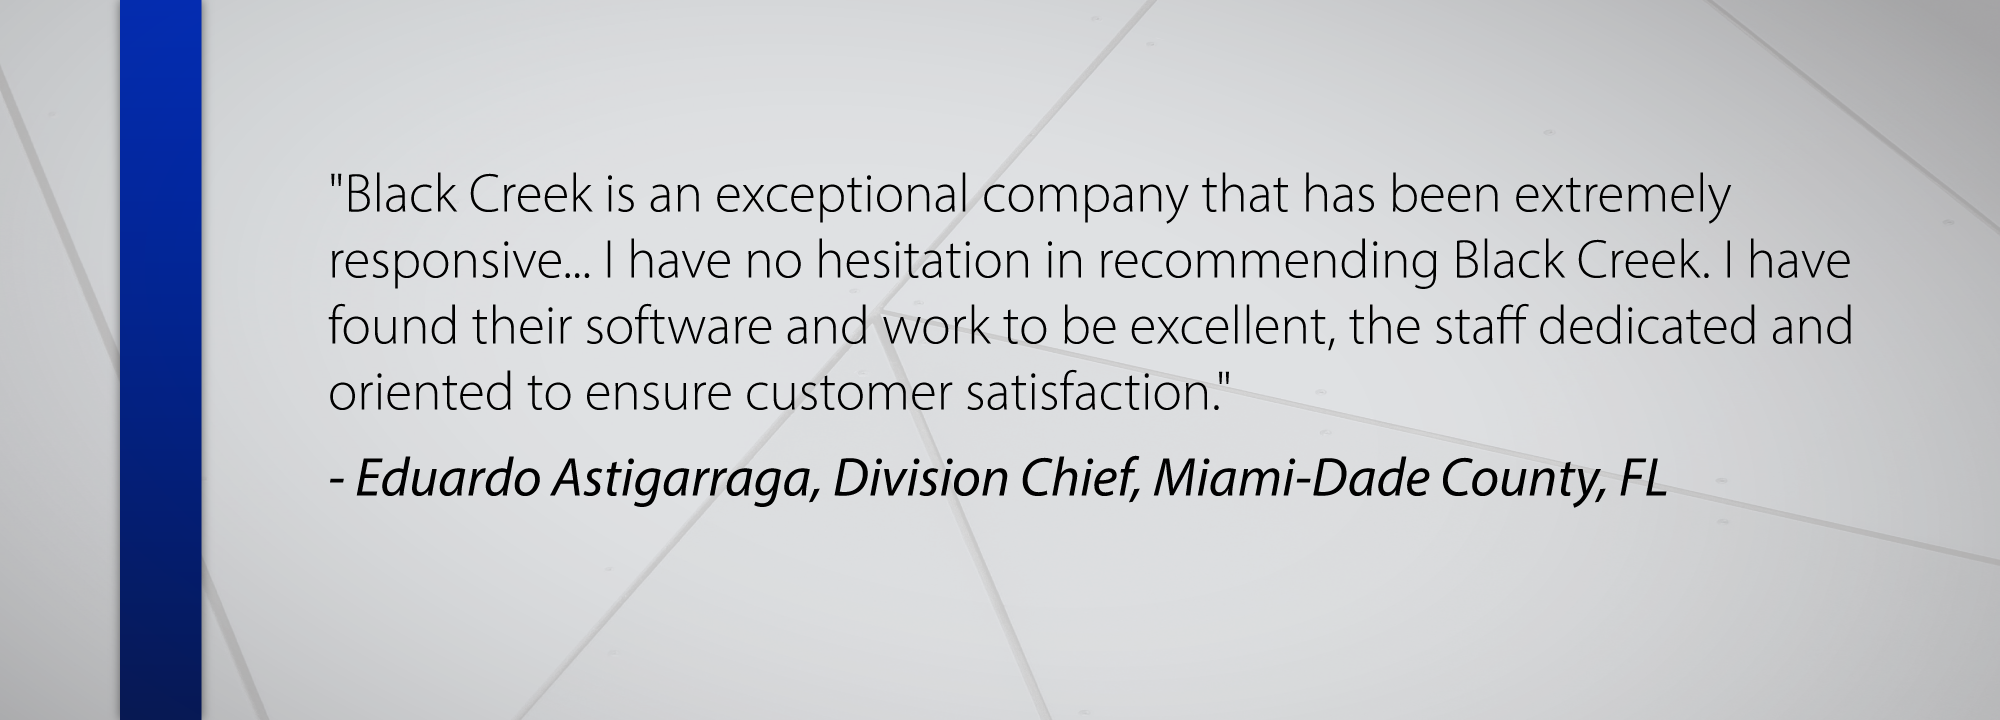 Black Creek is an exceptional company that has been extremely responsive... I have no hesitation in recommending Black Creek. I have found their software and work to be excellent, the staff dedicated and oriented to ensure customer satisfaction. - Eduardo Astigarraga, Division Chief, Miami-Dade County, FL